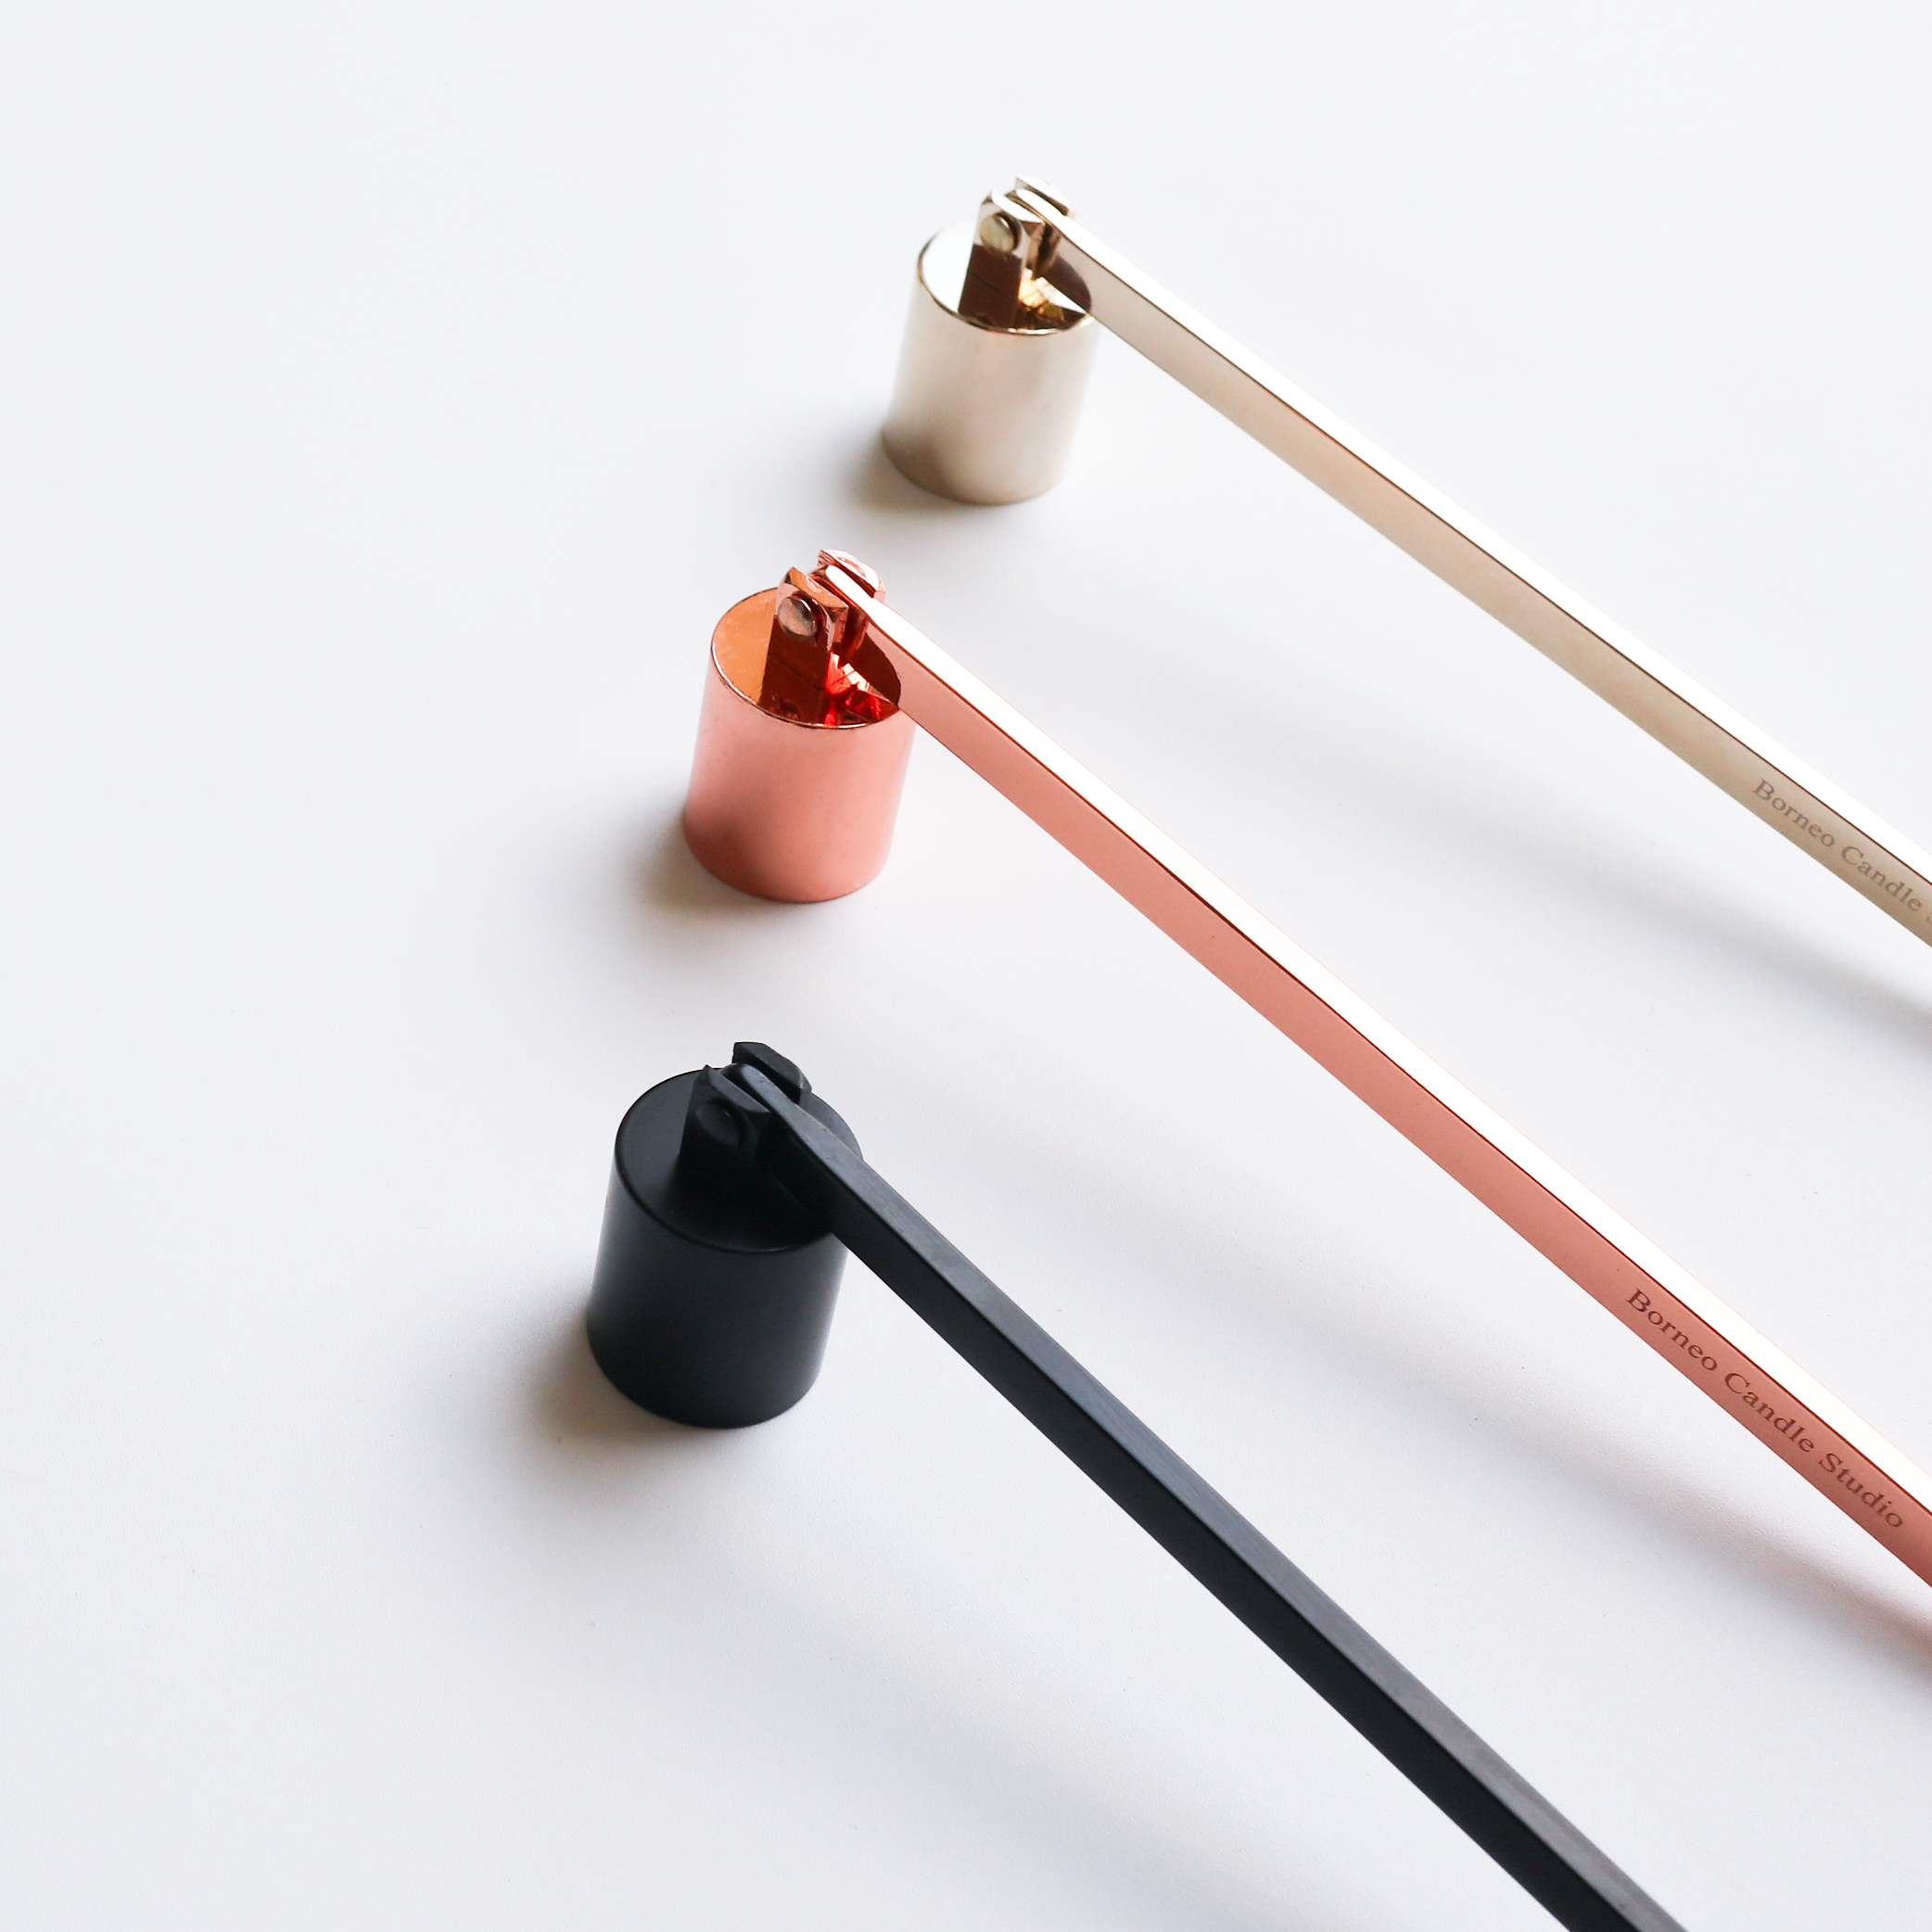 Candle snuffer camdle care accessory in rose gold, gold and black colour